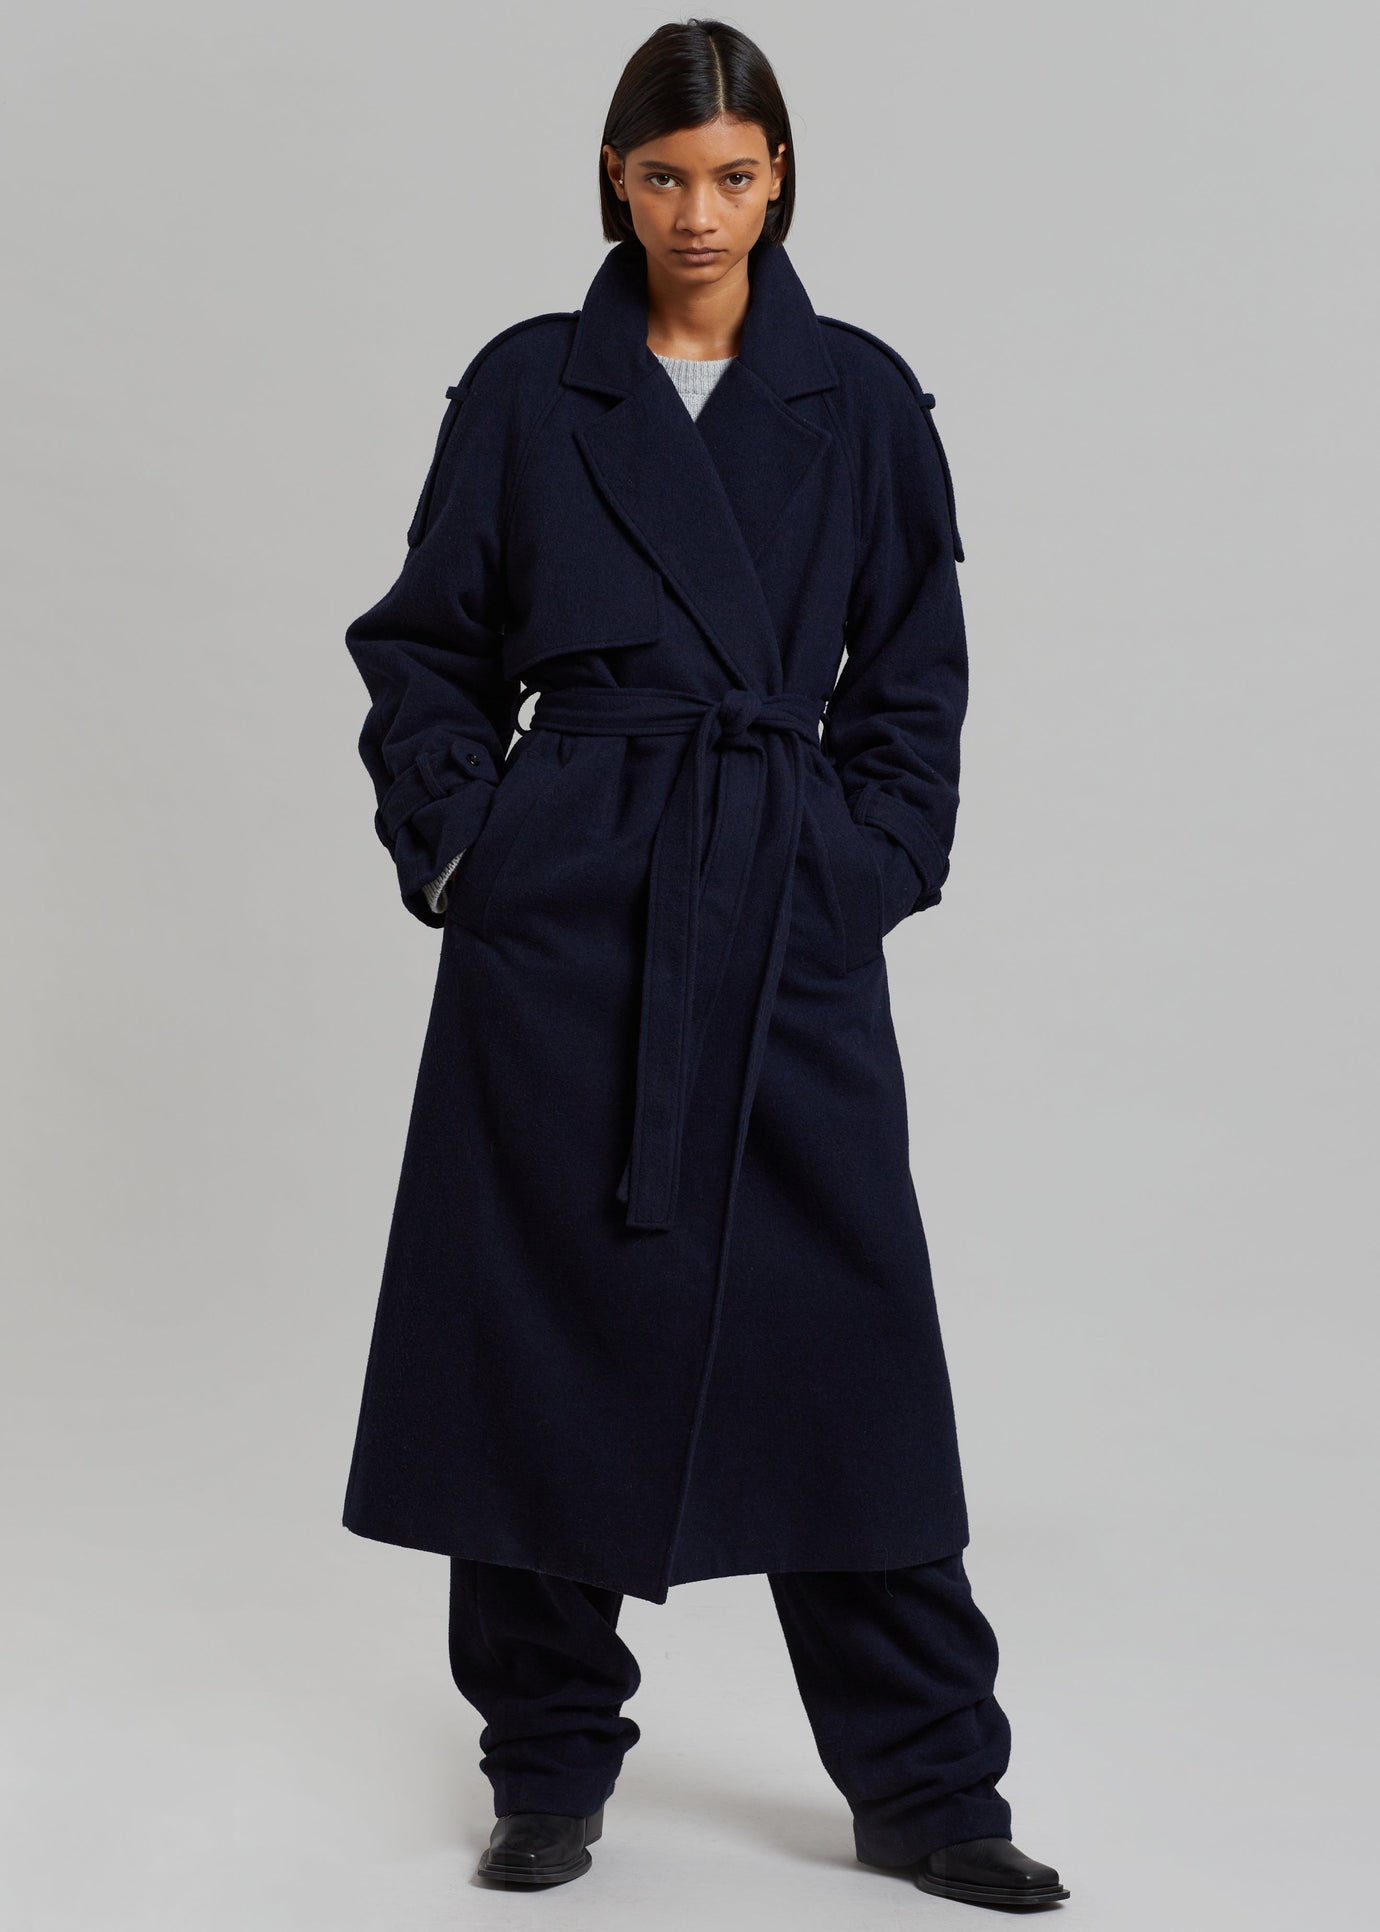 Suzanne Wool Trench Coat - Navy - 1